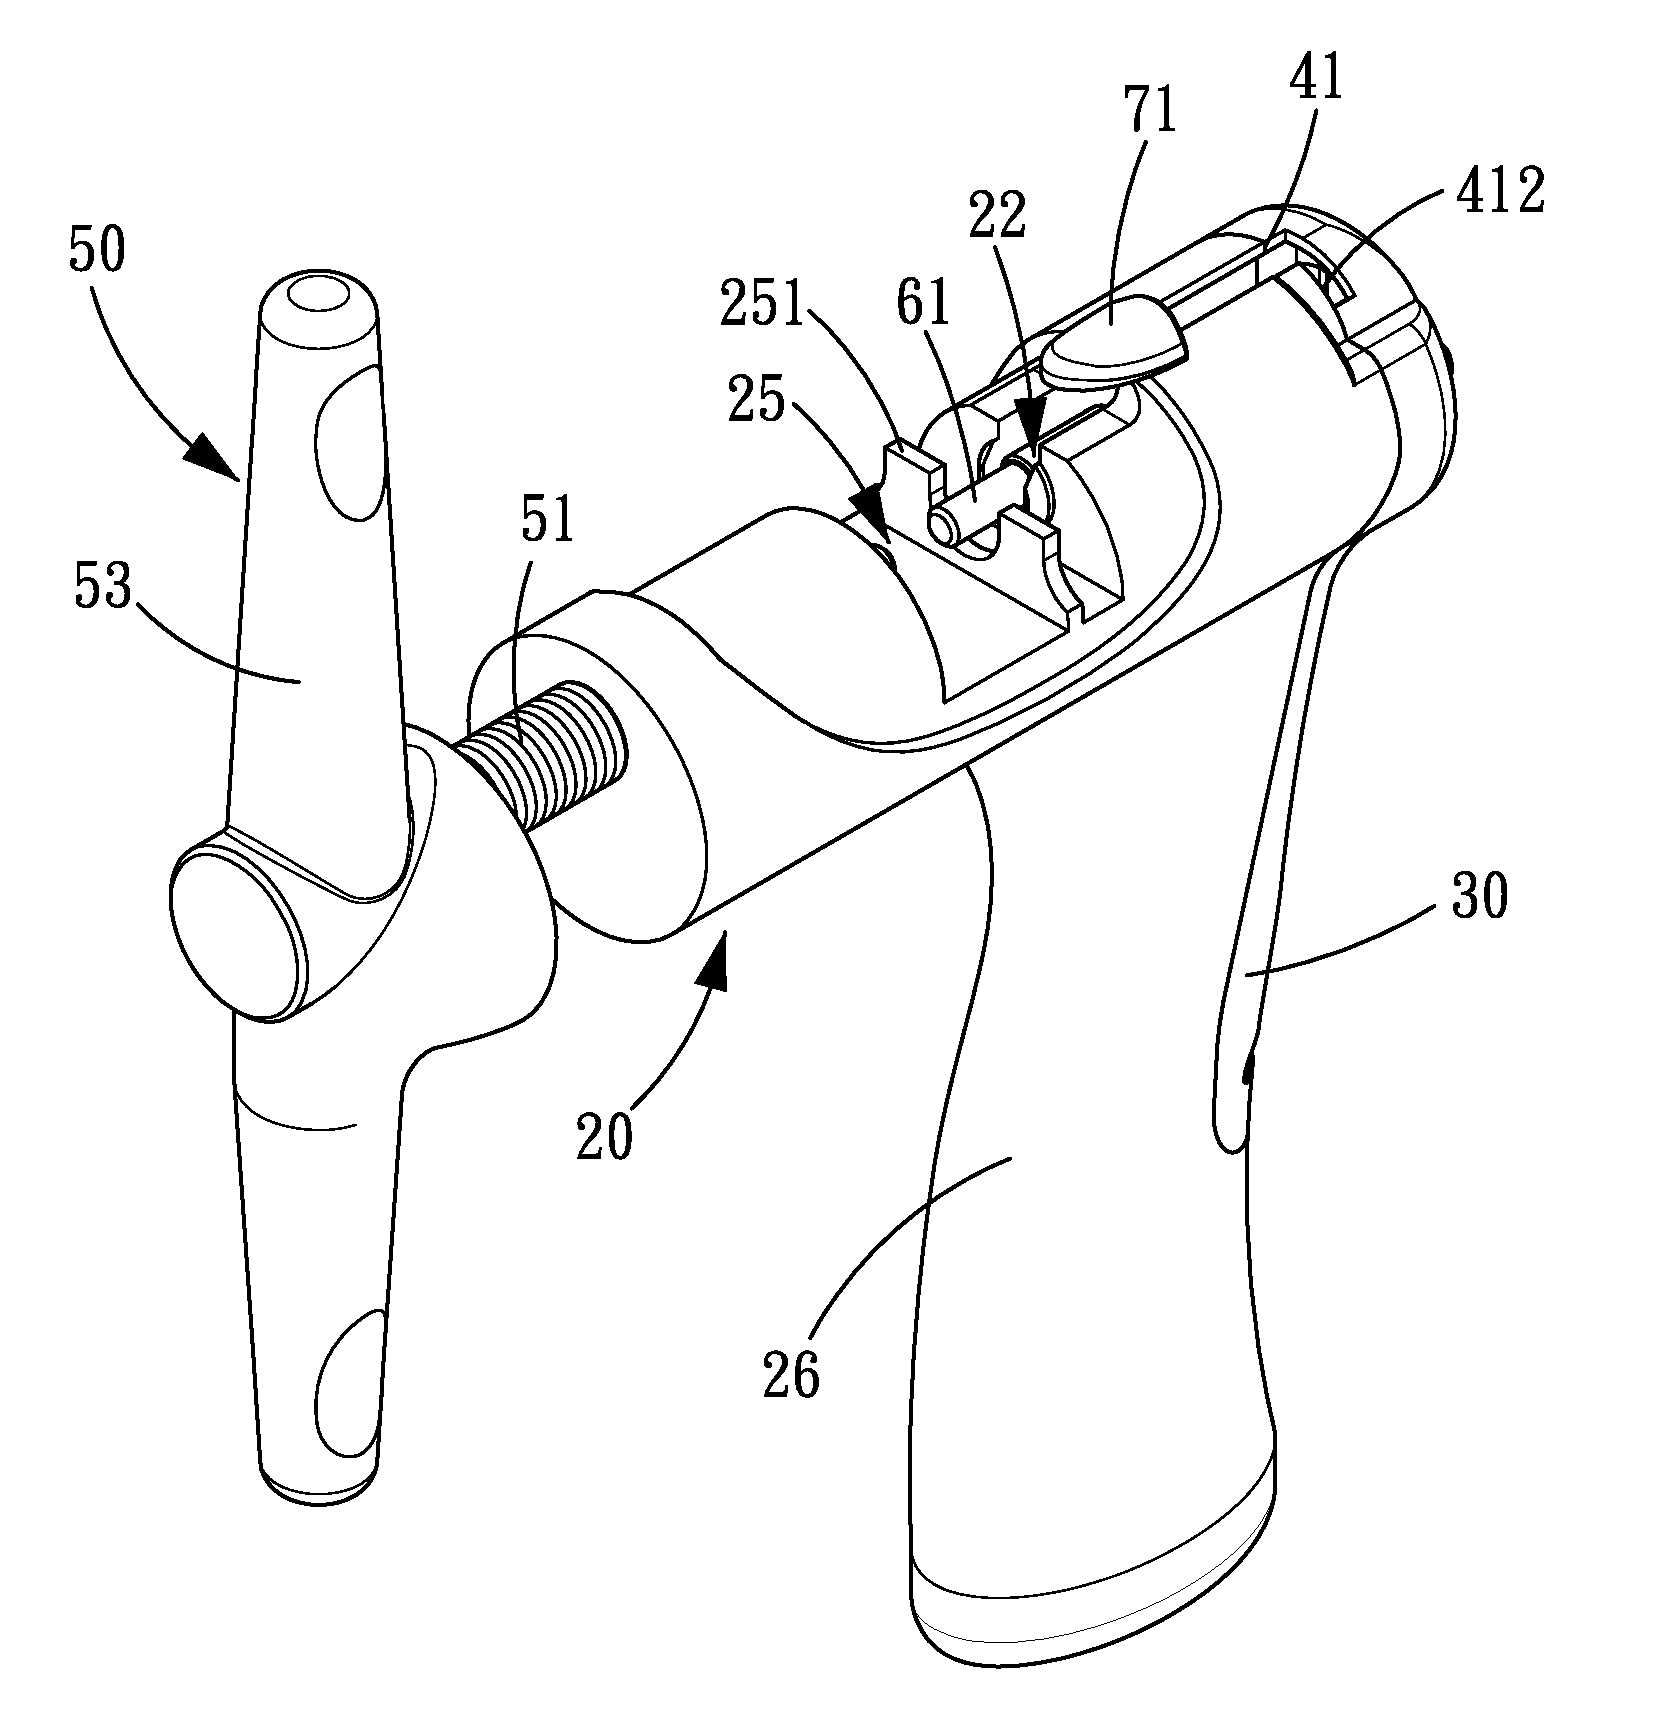 Device for Assembling and Disassembling a Bicycle Chain